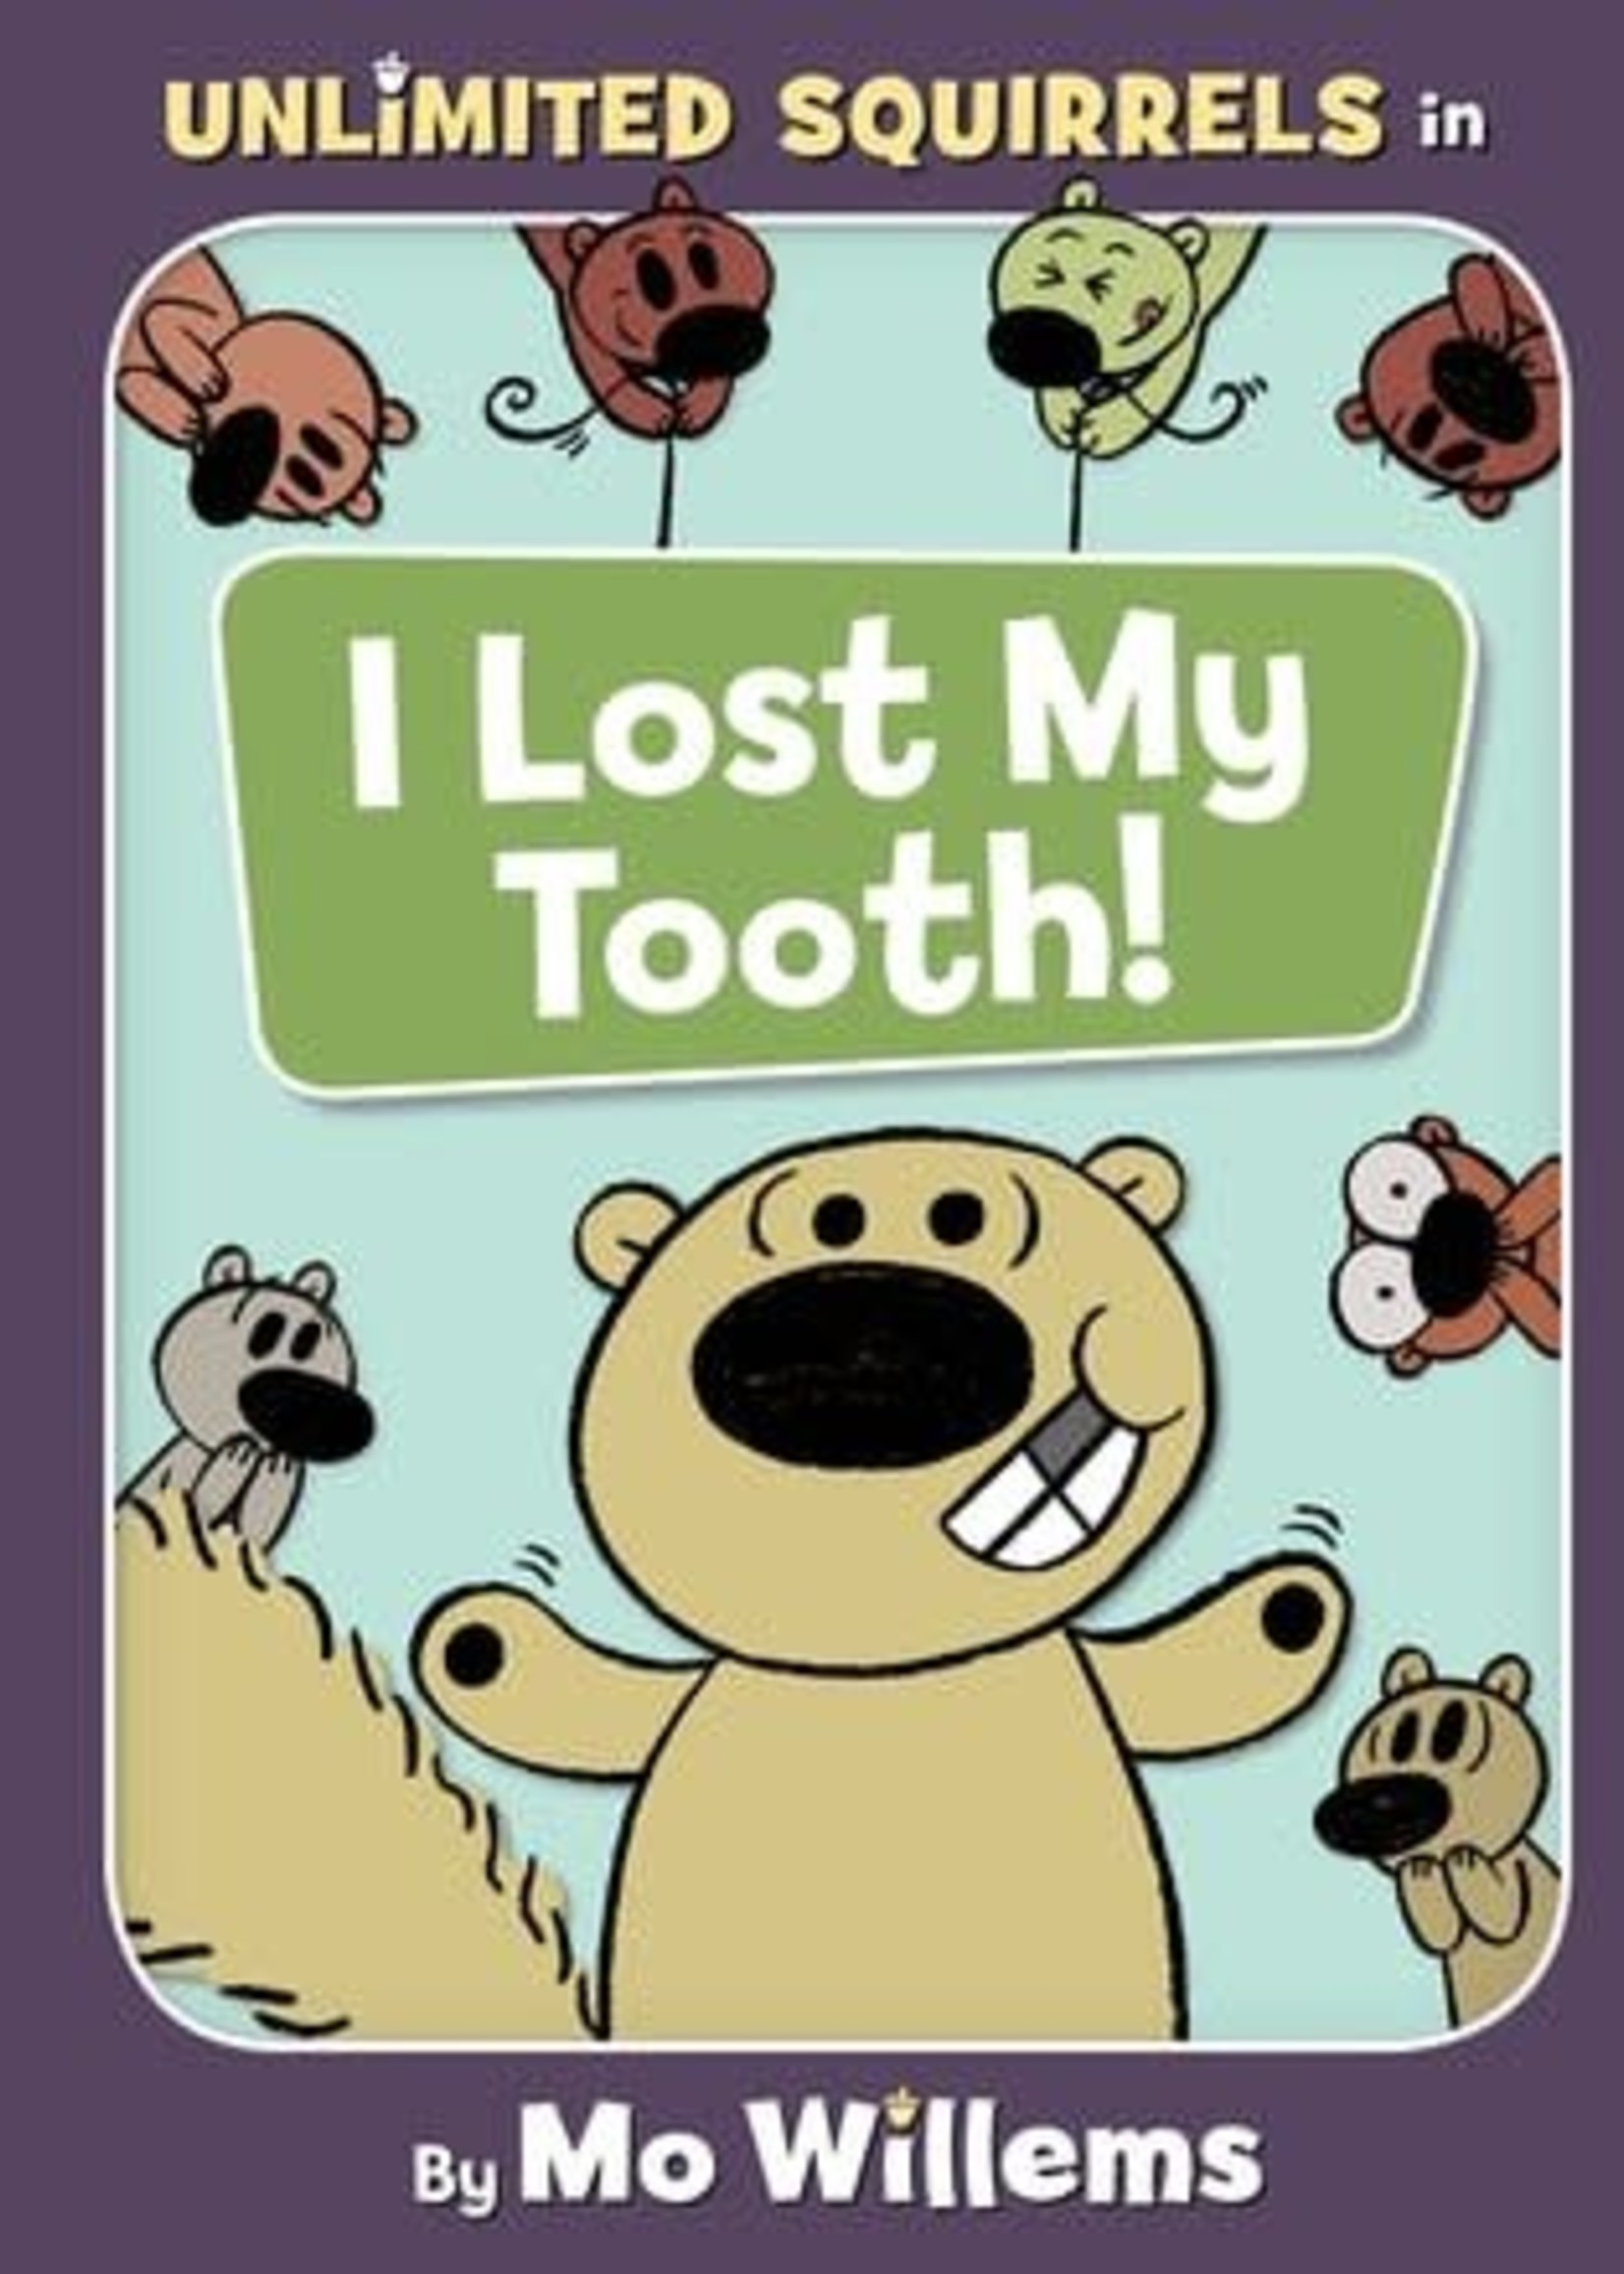 I Lost My Tooth! by Mo Willems